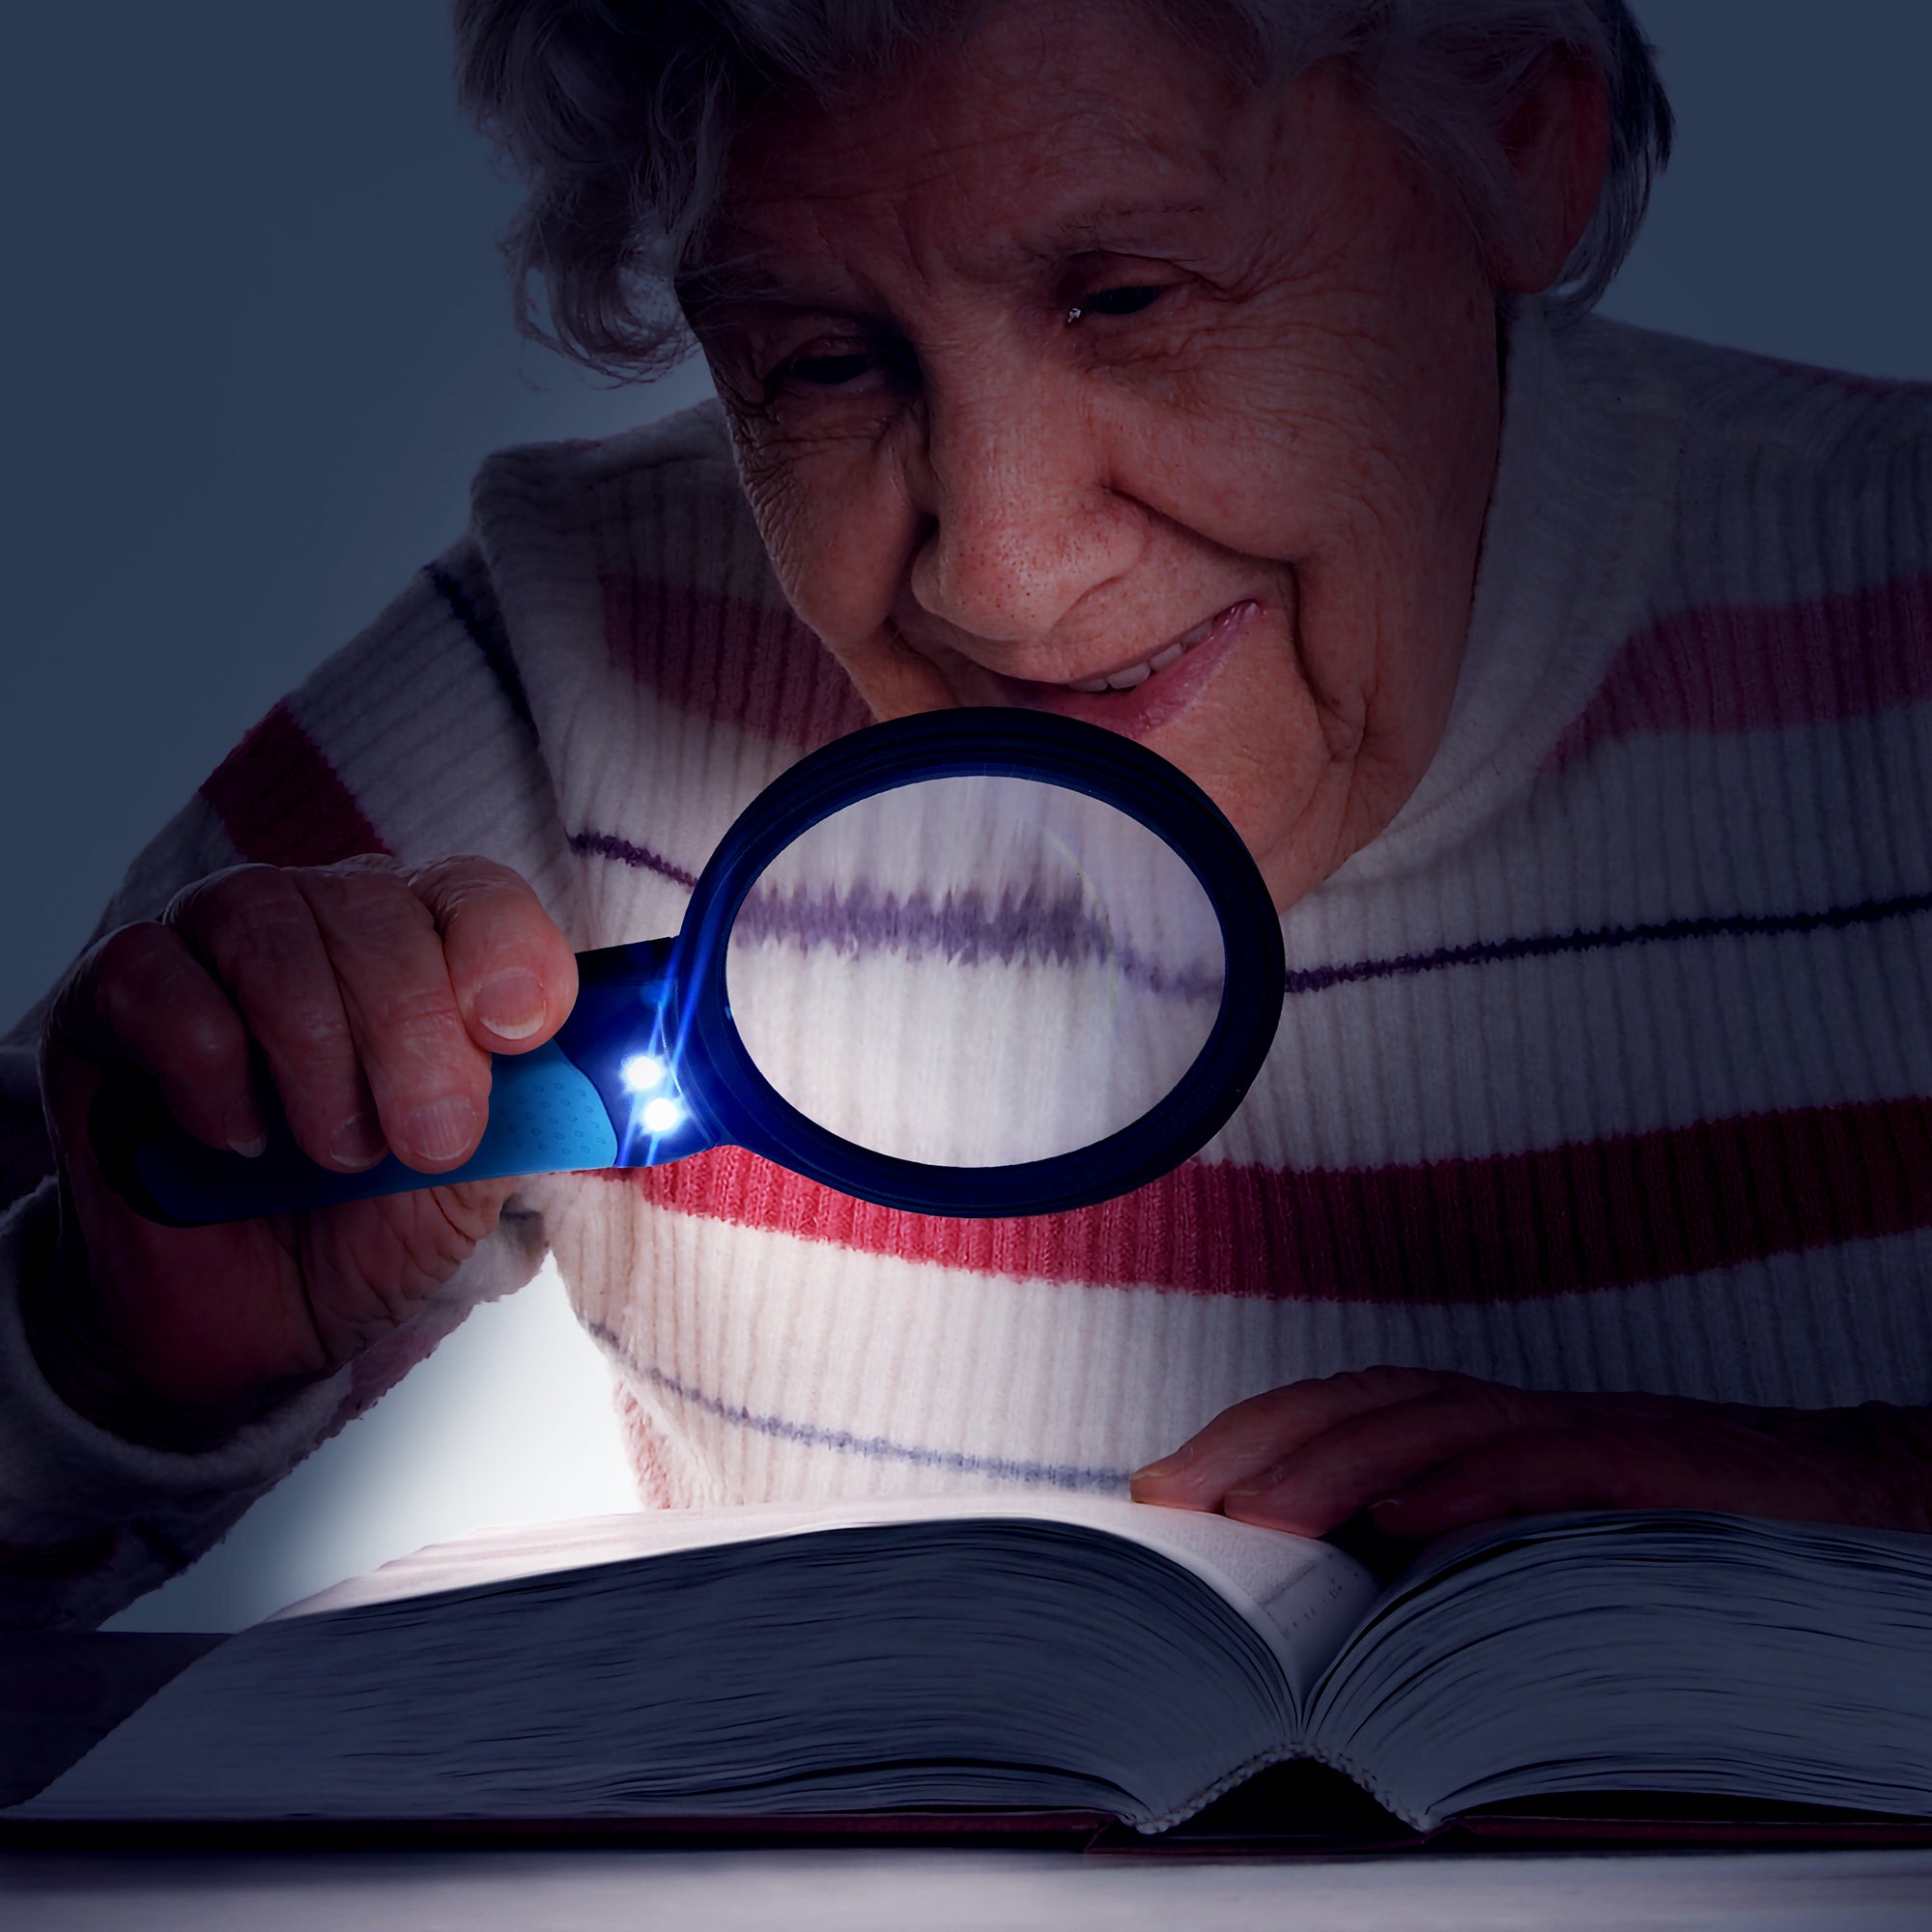 Magnifying Glass with Bright LED Lights- 2.5X, 5X, 16X Handheld Magnif –  MagniPros